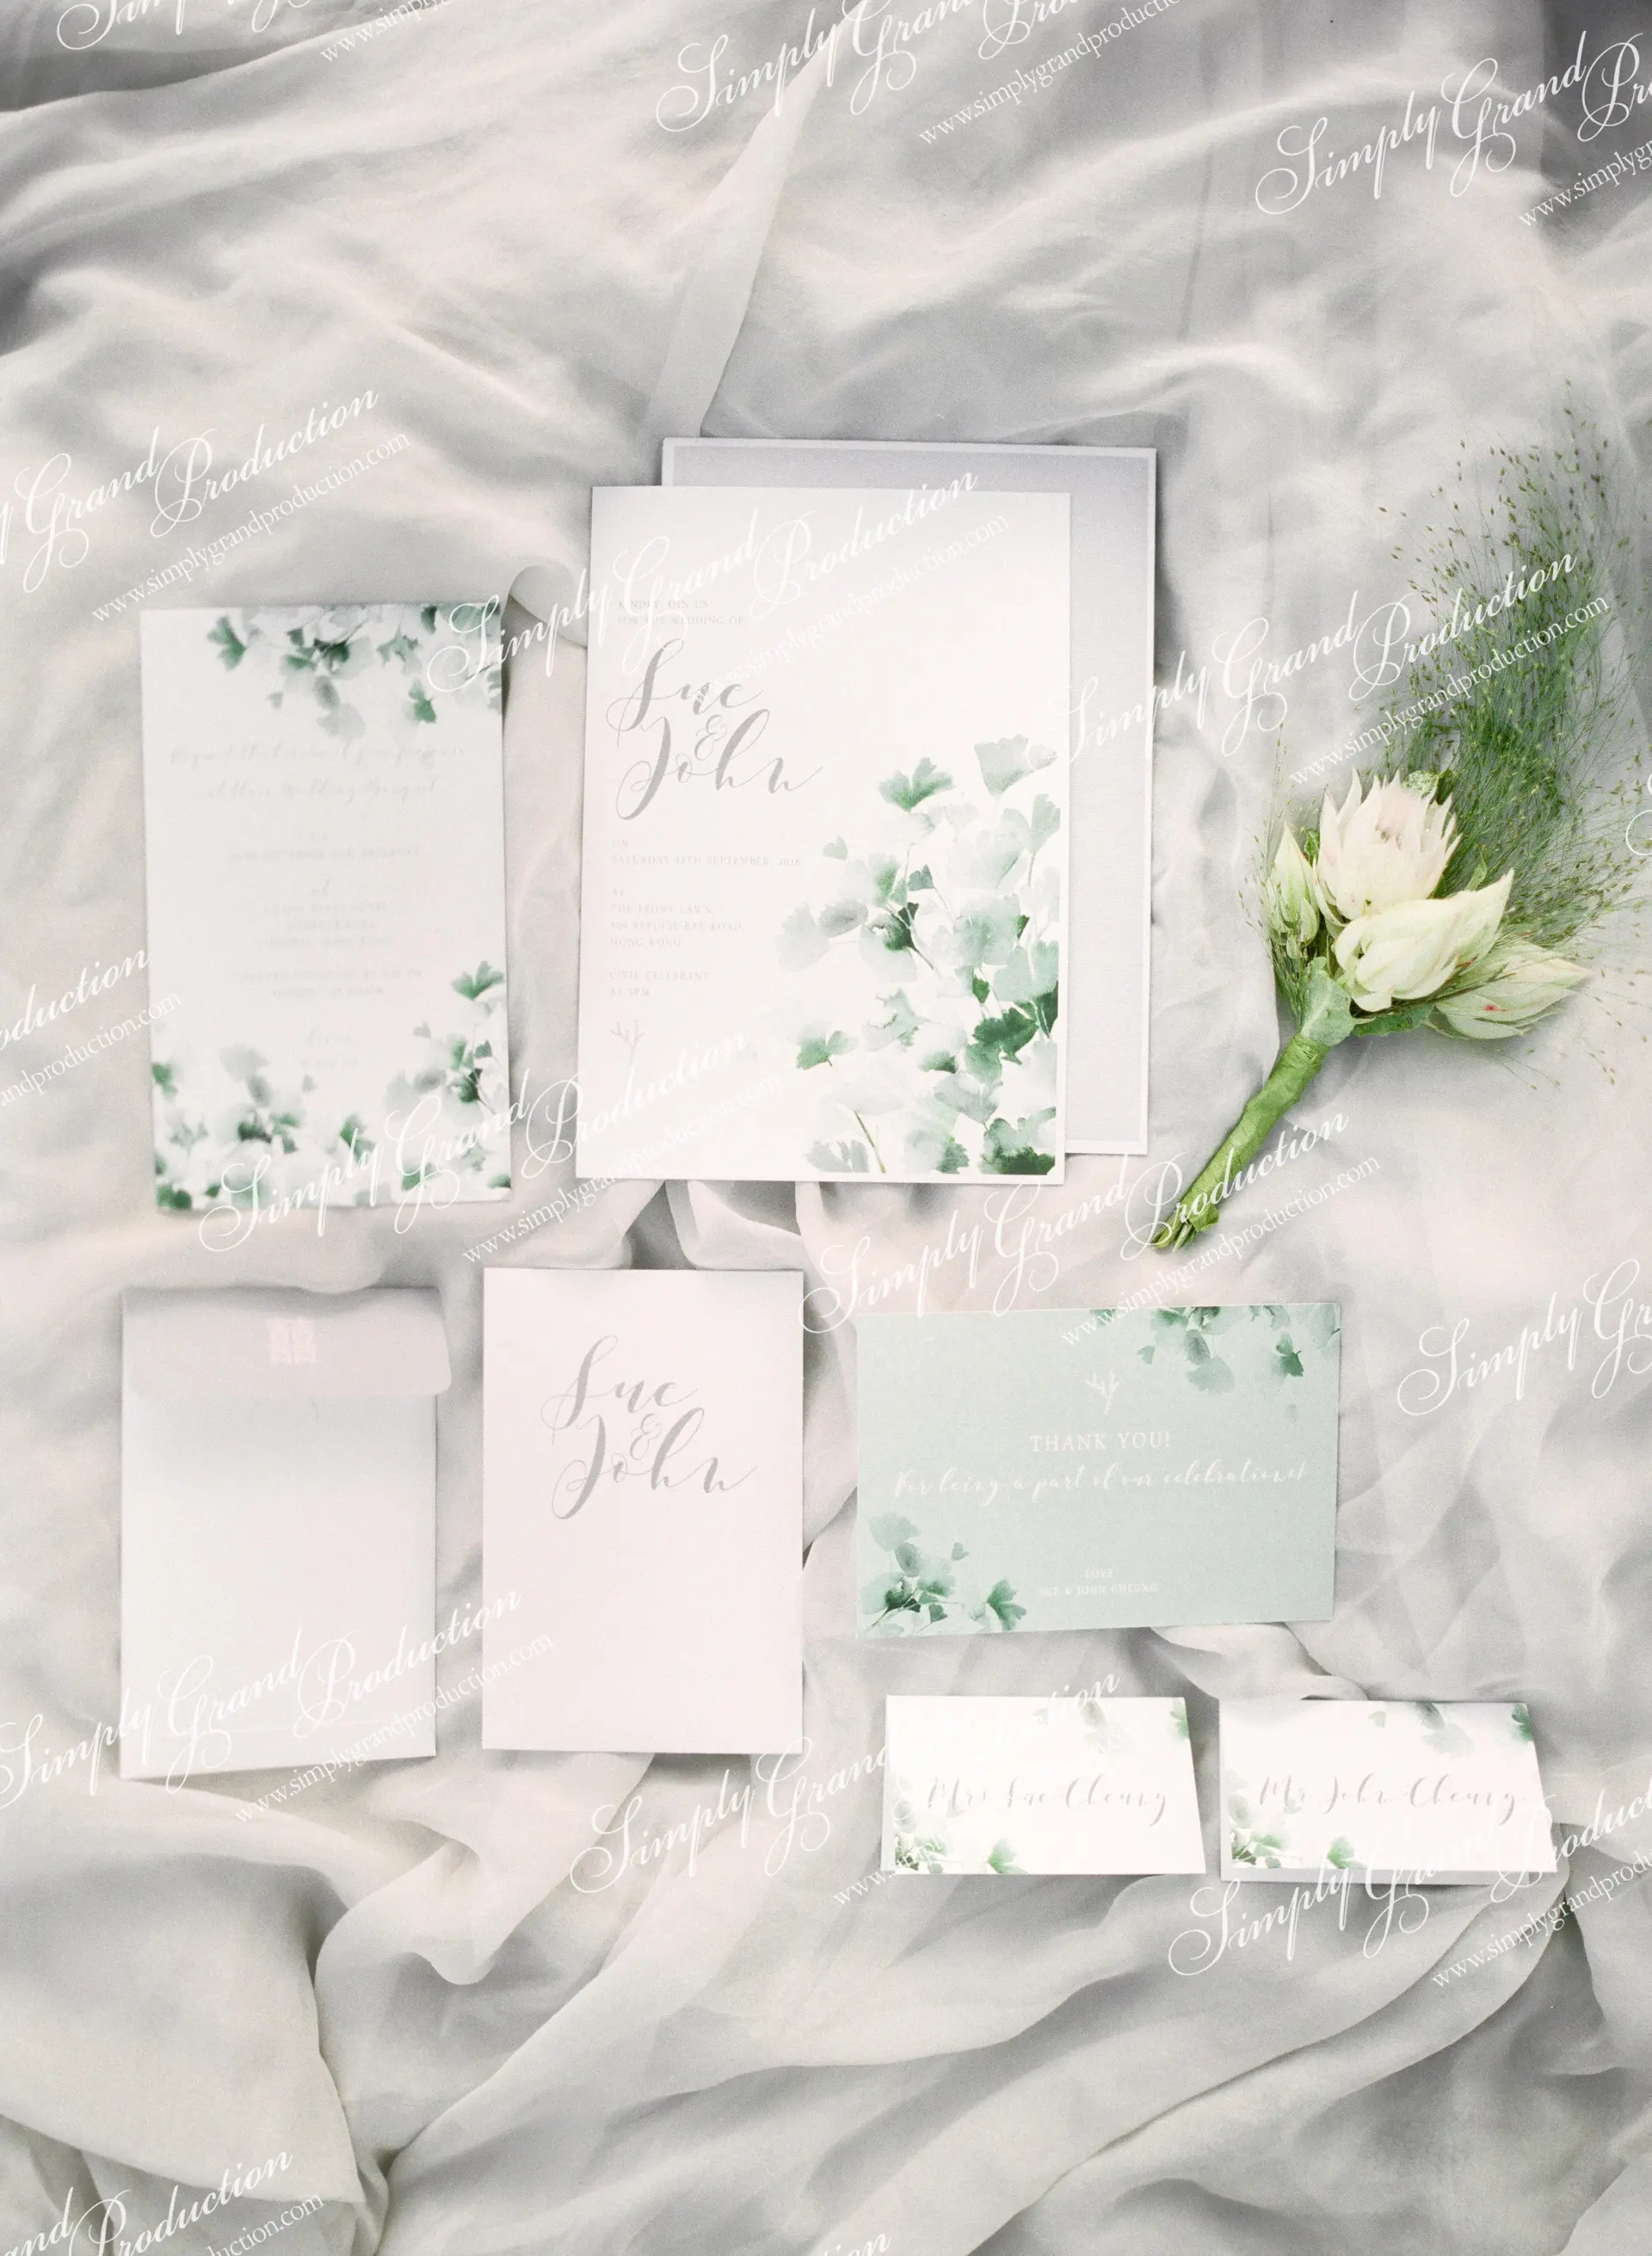 Simply_Grand_Production_Outdoor_wedding_decoration_photoshoot_Adventist_College_calligraphy_invitation_2_5.jpg